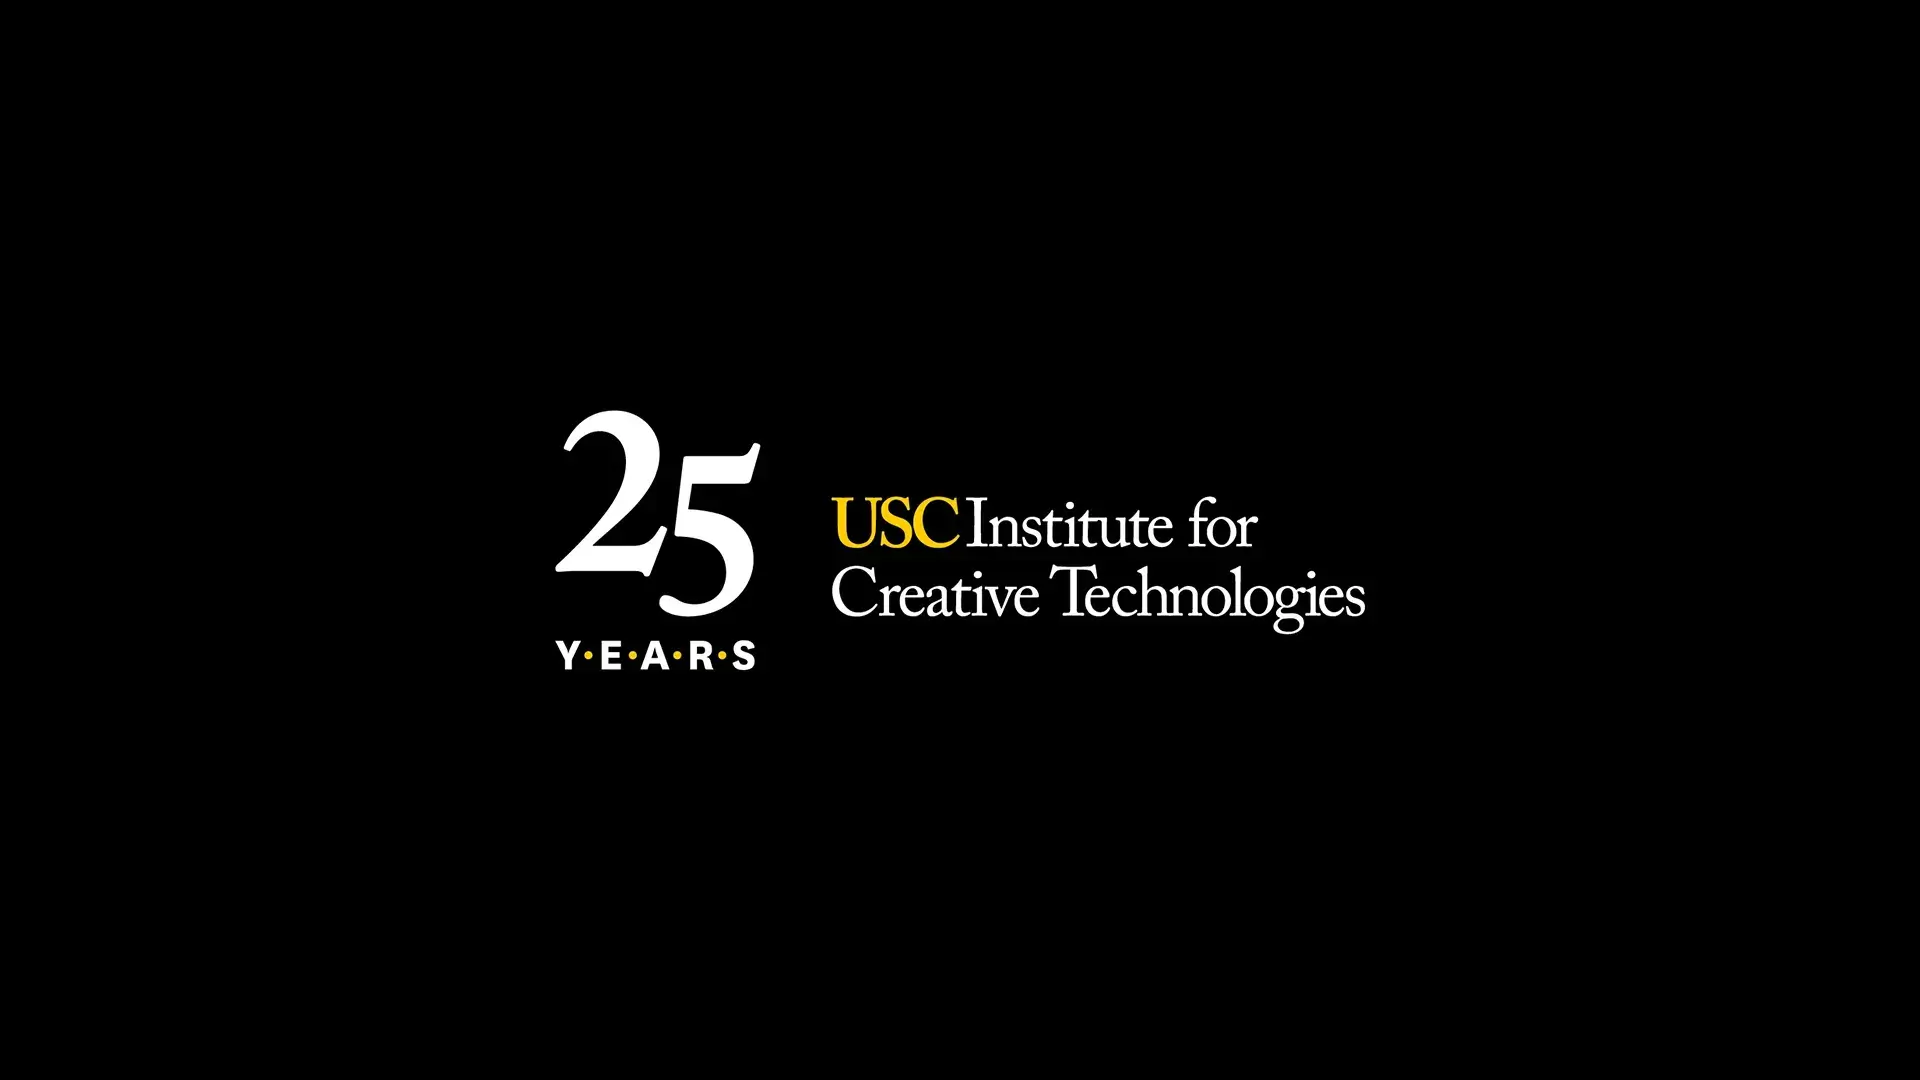 Heidi Shyu Under Secretary of Defense for Research and Engineering (OUSD(R&E)) to speak at ICT’s 25th Anniversary 